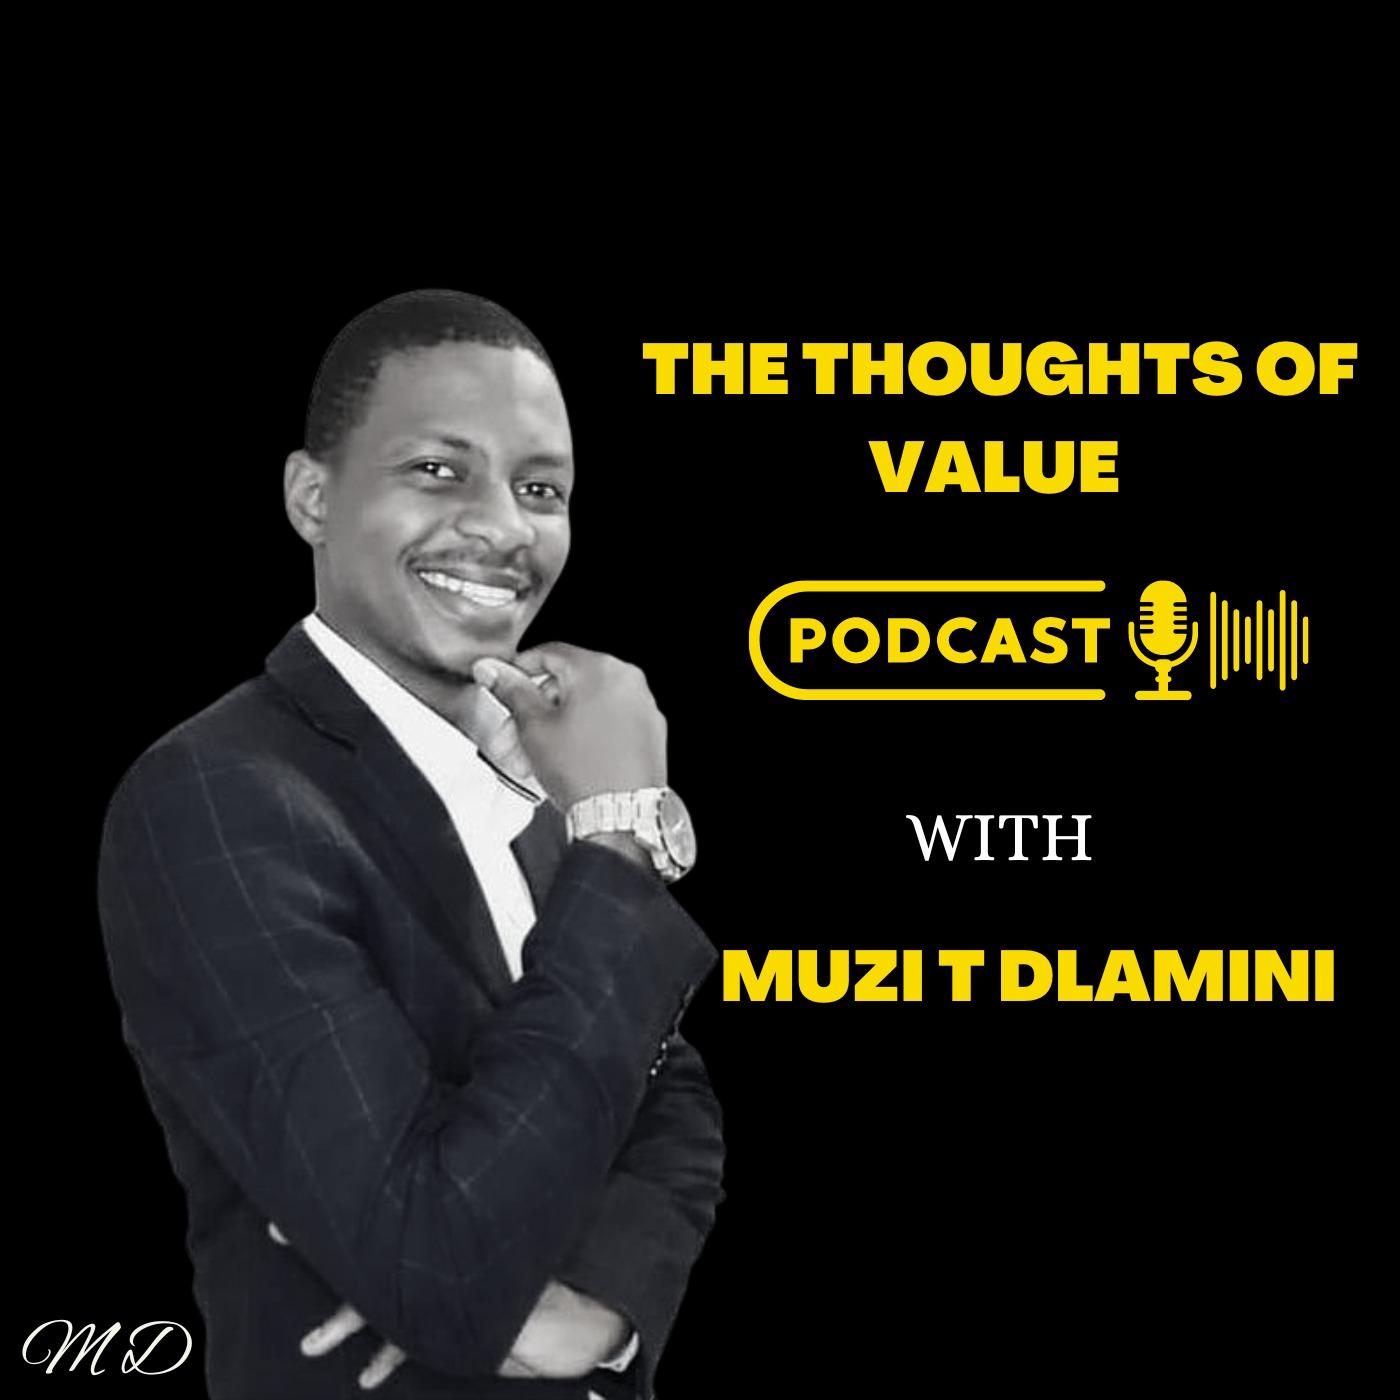 The Thoughts of Value Podcast